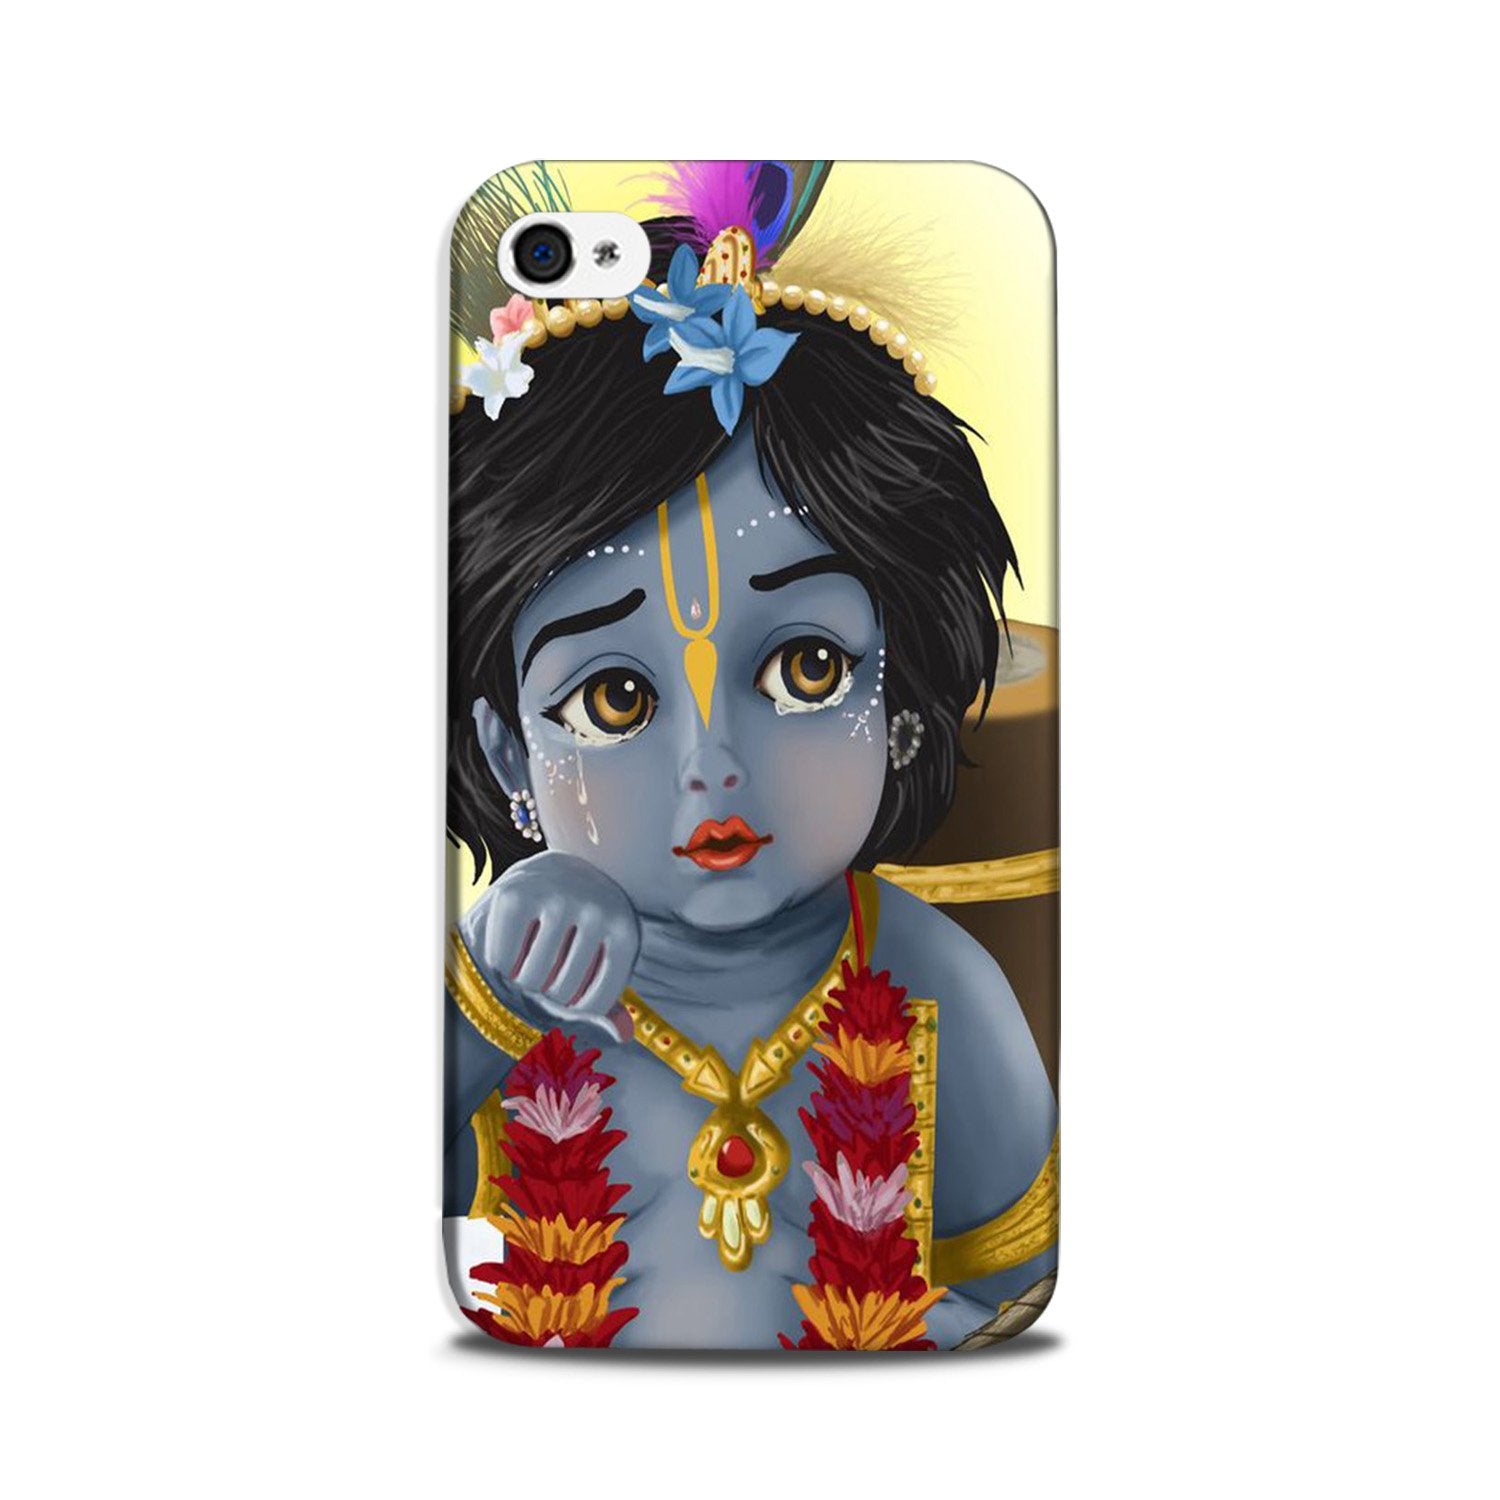 Bal Gopal Case for iPhone 5/ 5s